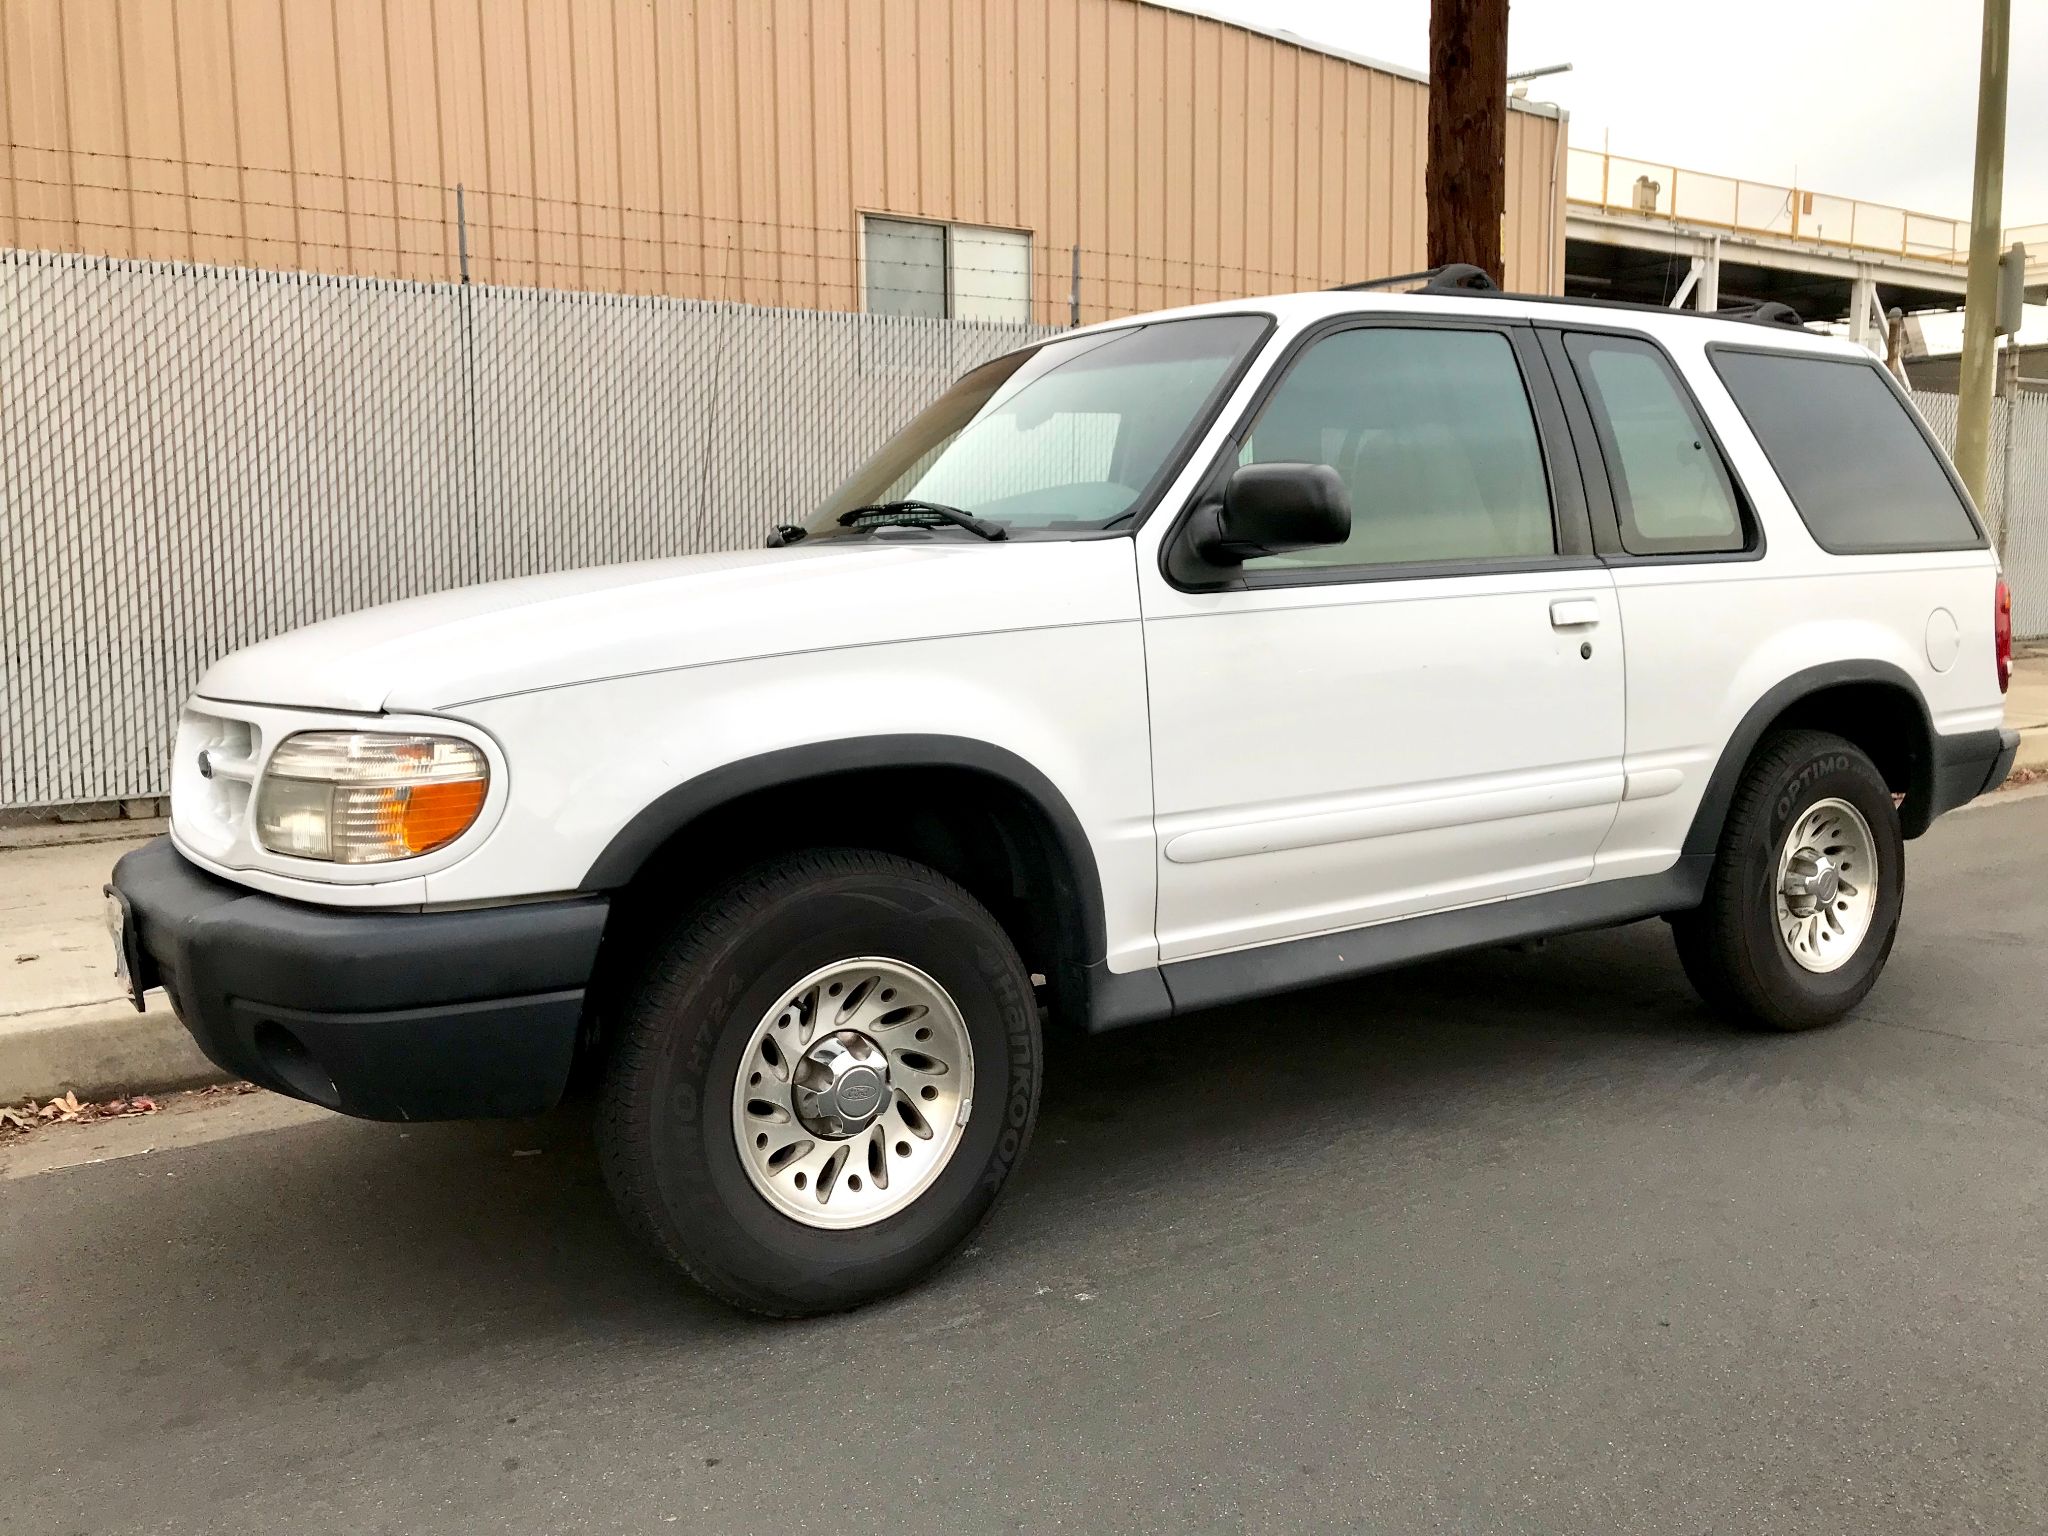 Used 1999 Ford Explorer Sport At City Cars Warehouse Inc